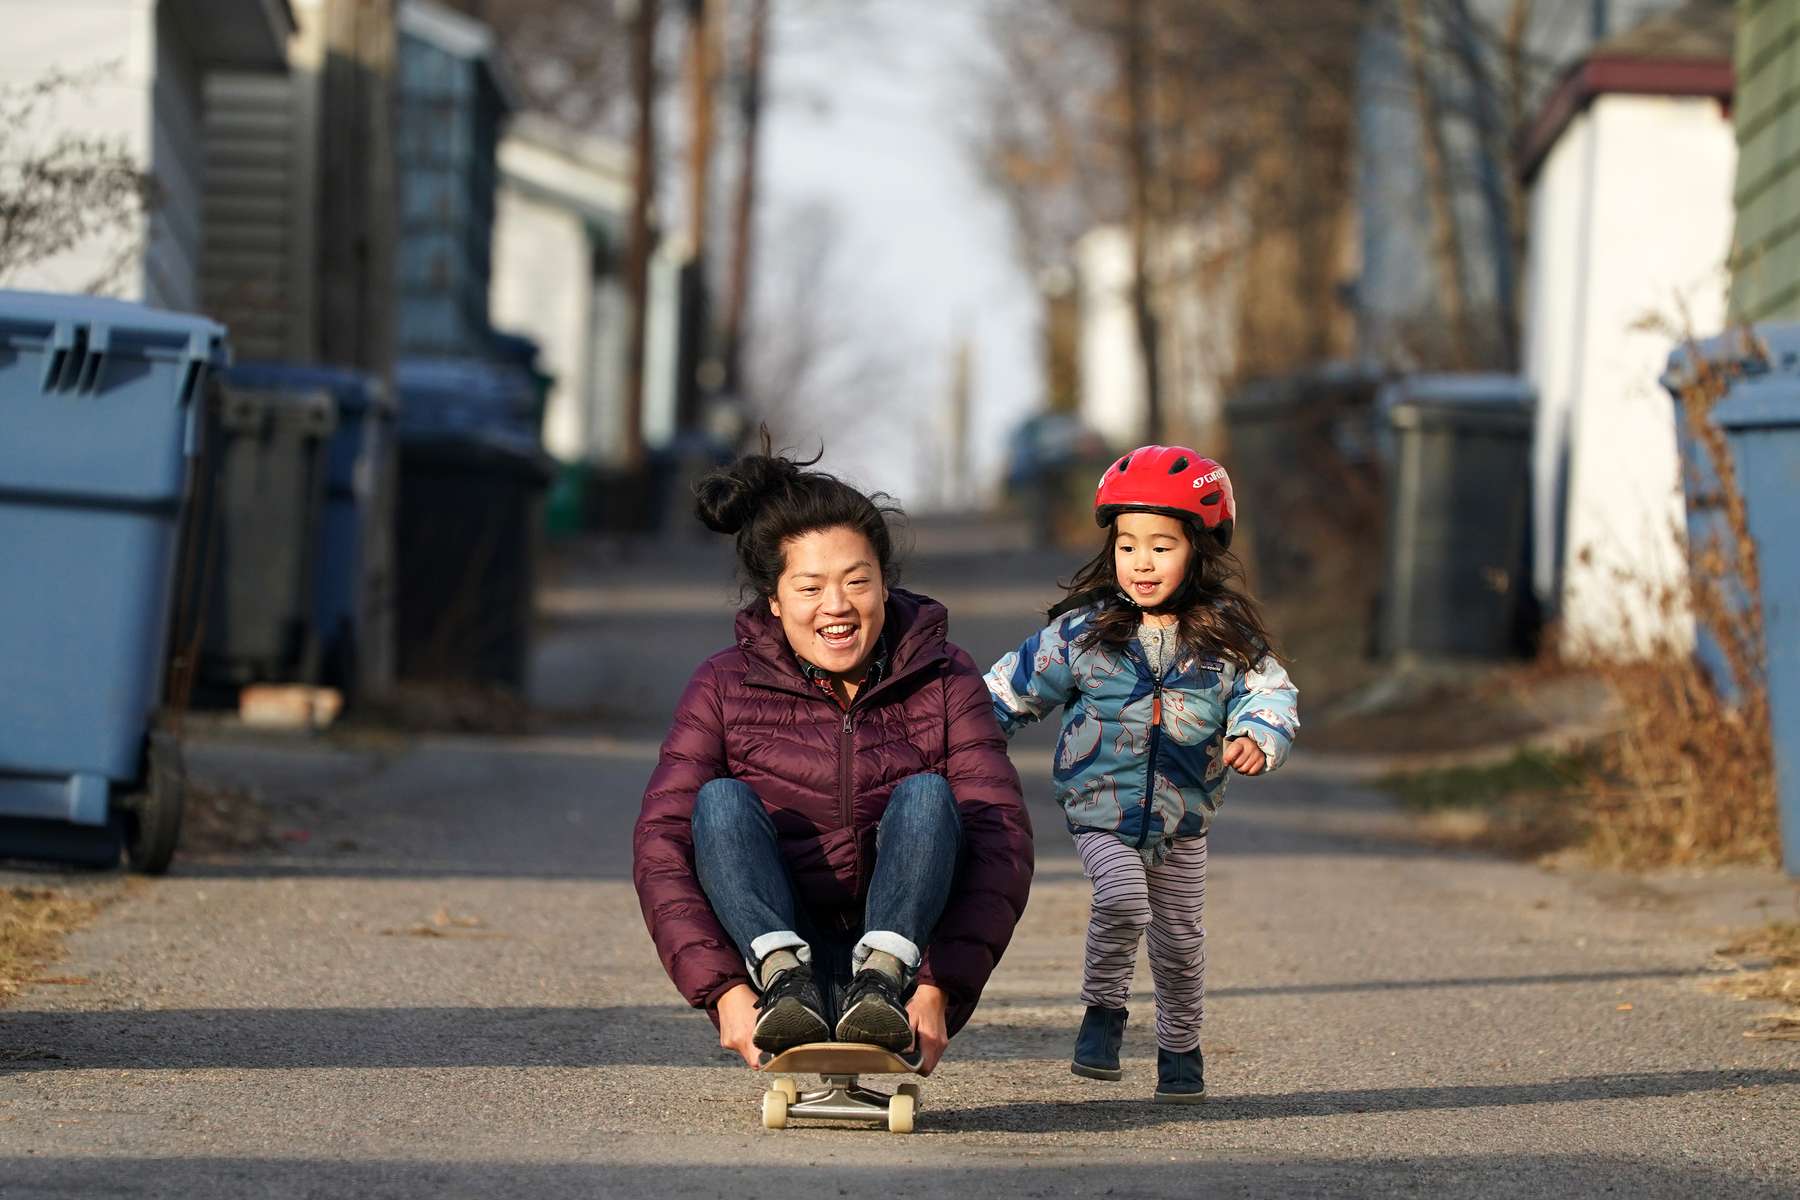 Leslie Kegan got a push from her daughter Lucille, 3, as she rode a skateboard down the alley behind their home on an unseasonably warm Decemeber day in northeast Minneapolis.